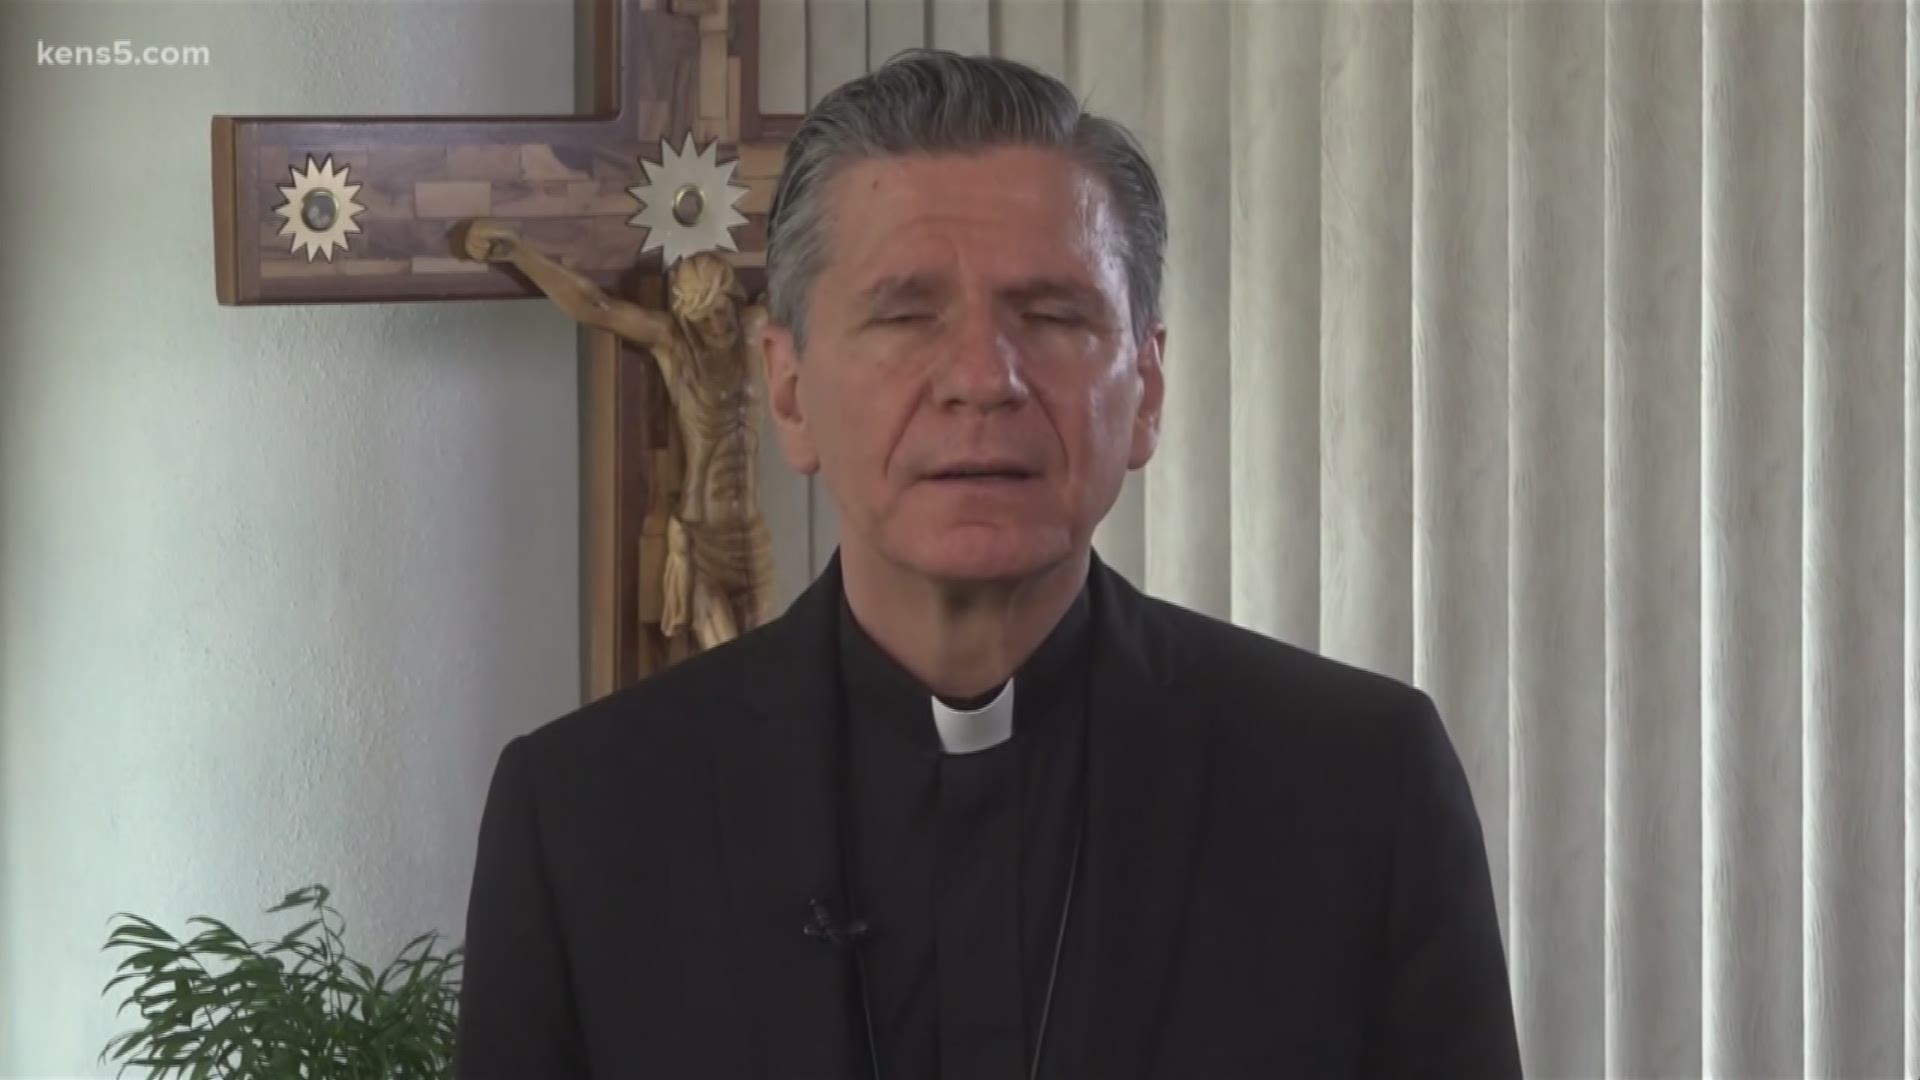 Archbishop Gustavo Garcia-Siller shared his thoughts on Twitter following the mass shootings in El Paso and Dayton, Ohio, then deleted the tweets.